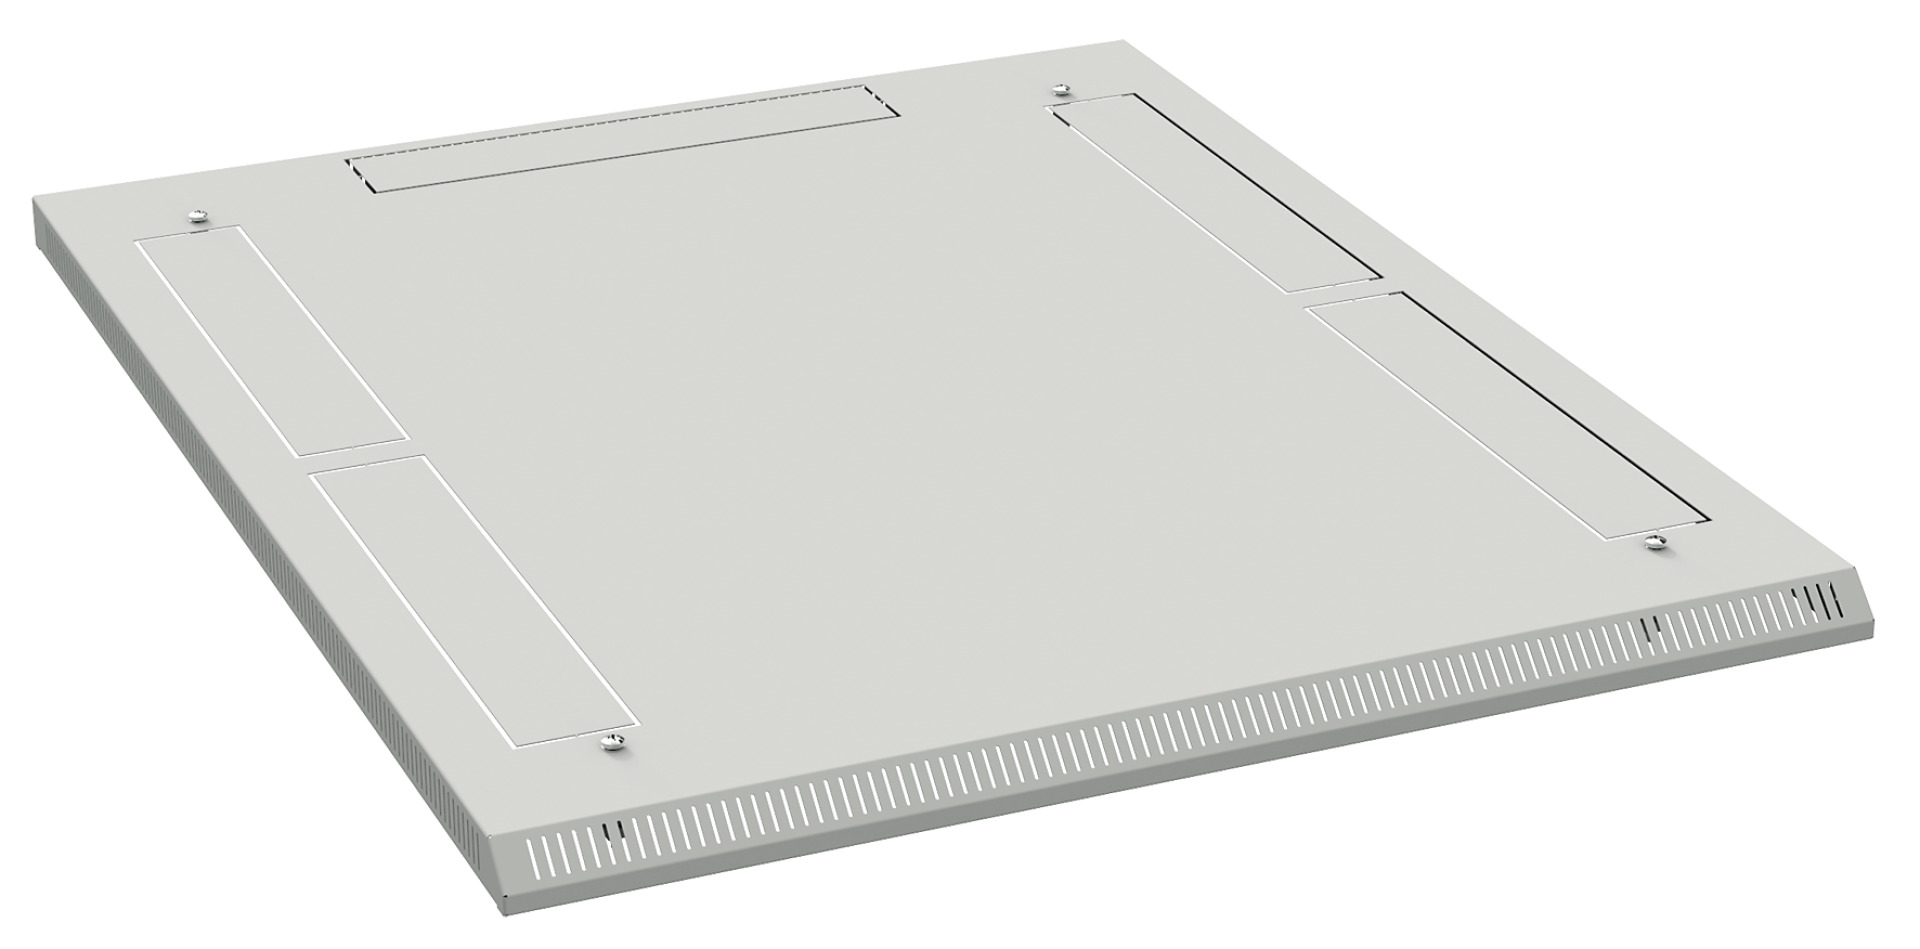 Additional Roof H=40 mm, 800x800 mm, RAL7035, for Cabinet Series PRO